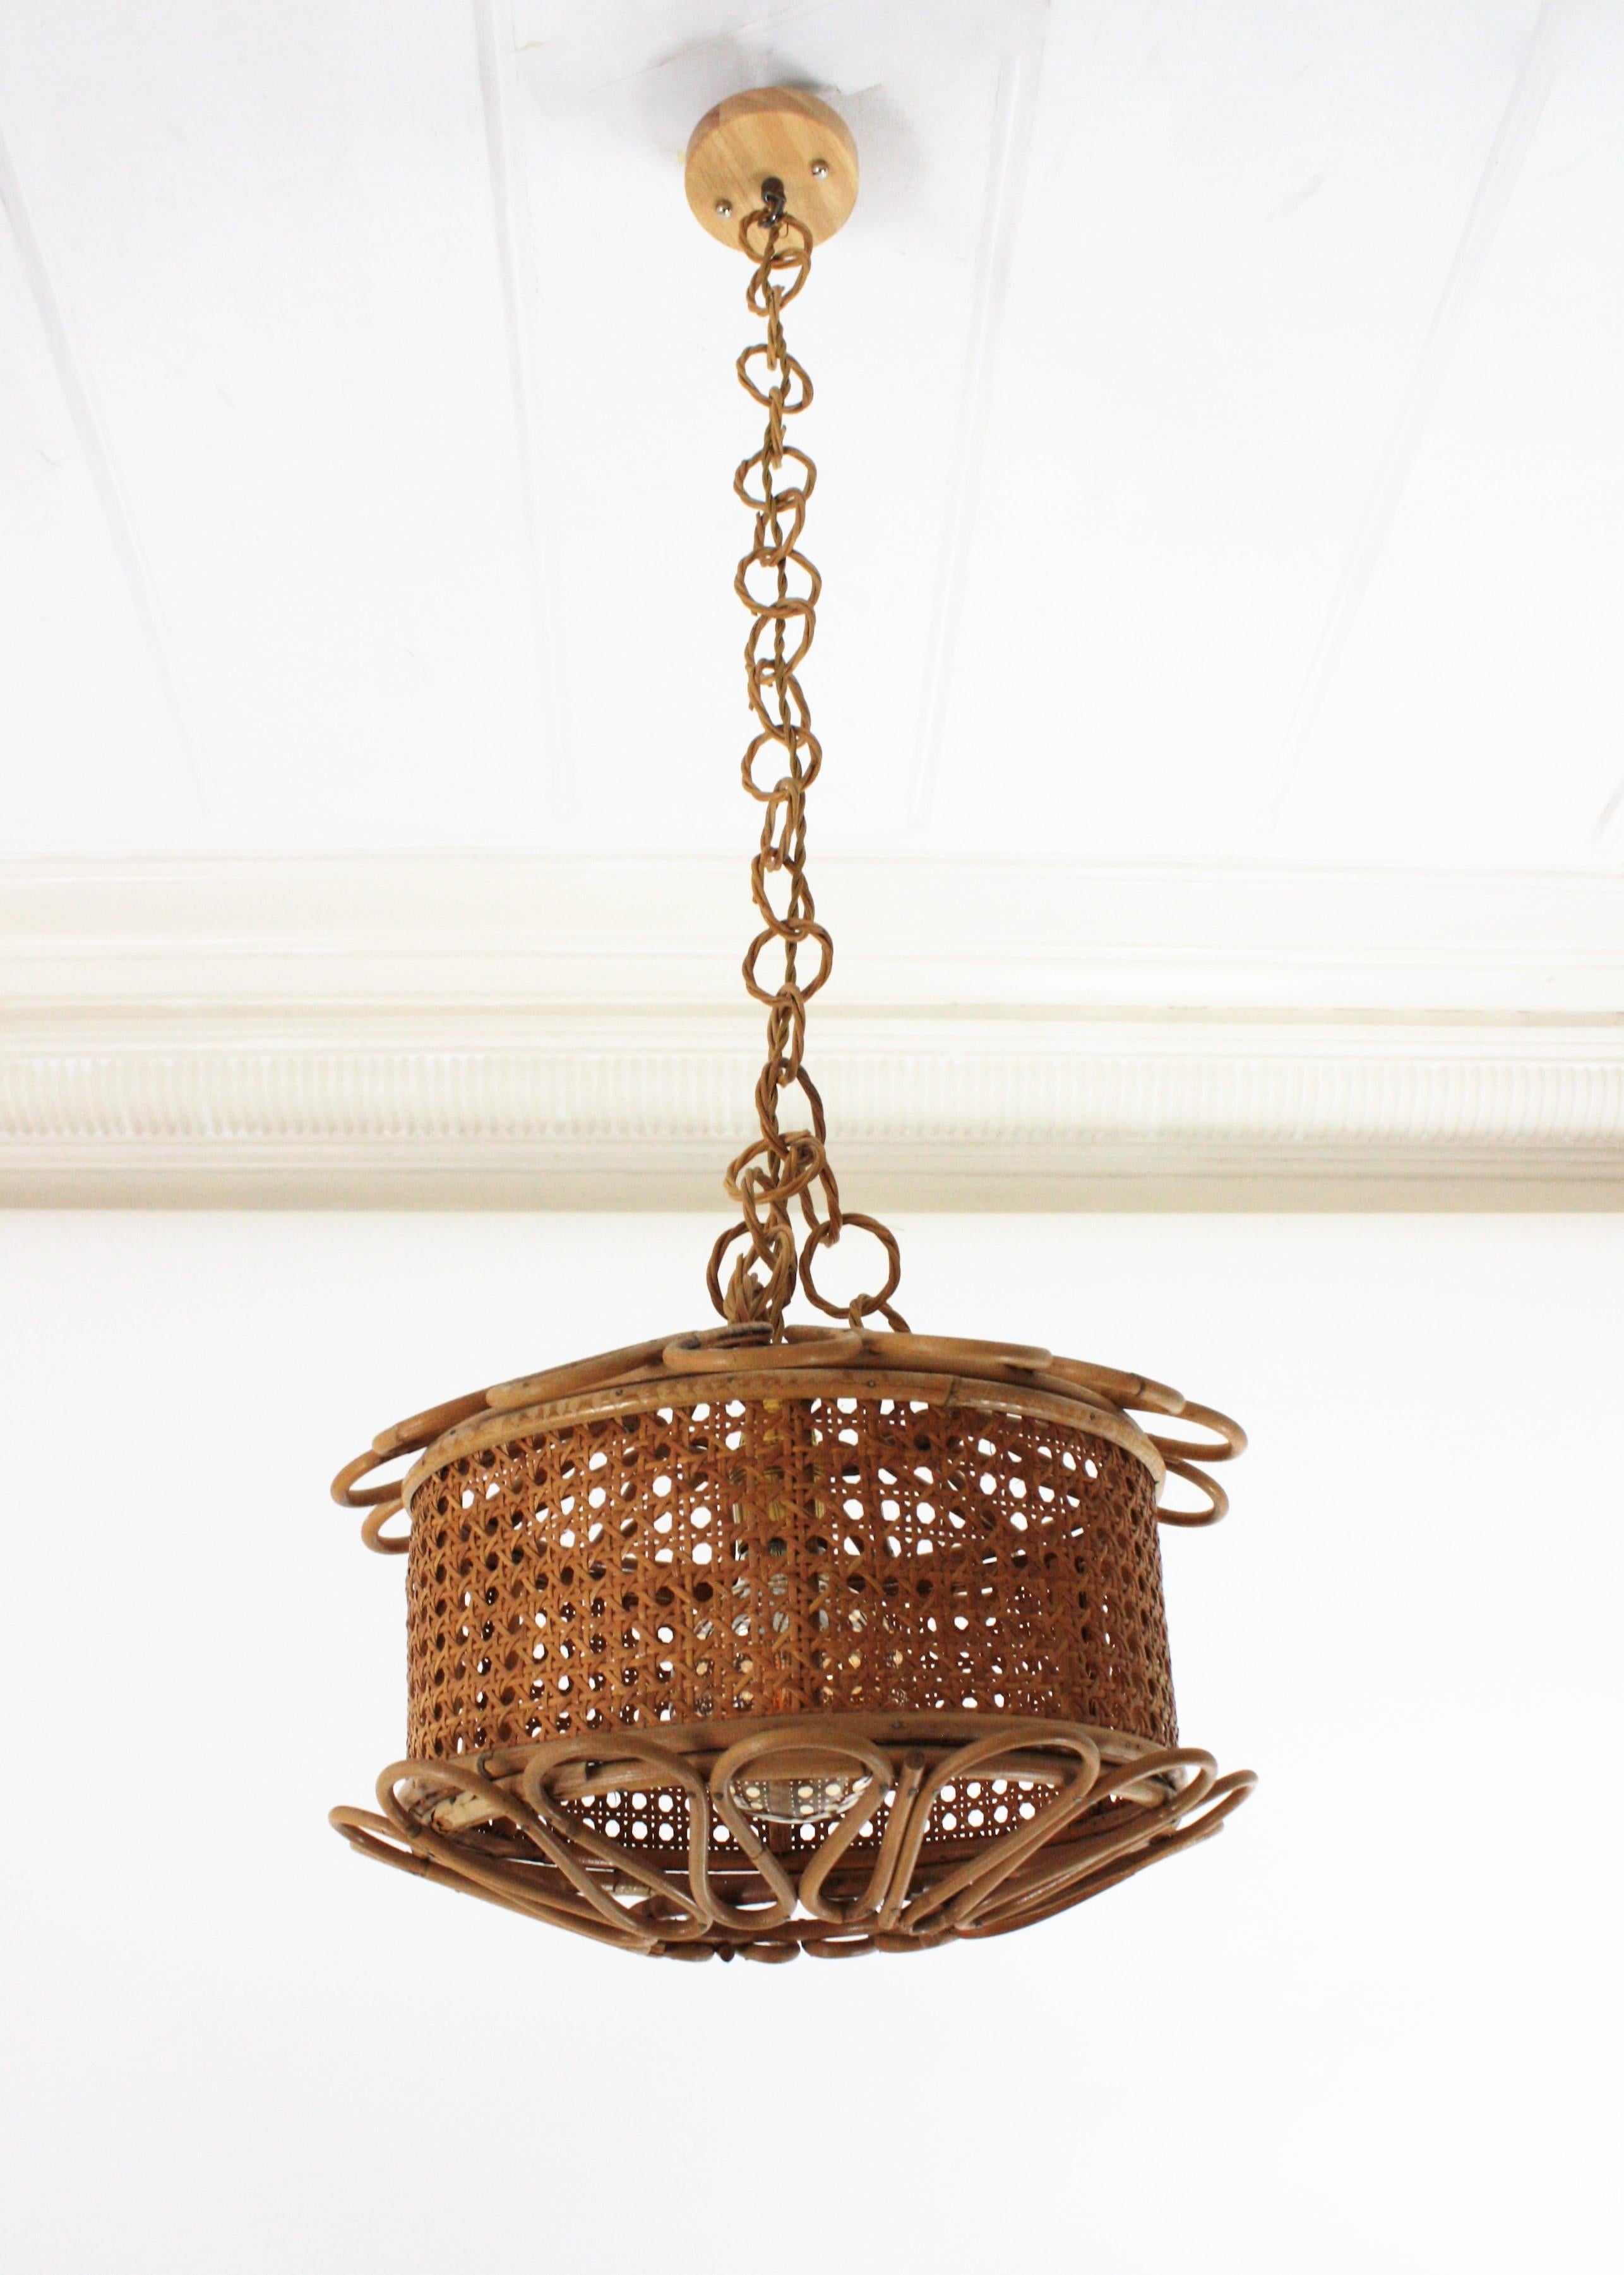 Beautiful Mid-Century Modern woven wicker wire and rattan pendant lamp / lantern, Italy, 1950s.
The woven wicker cylindrical shade of this lamp is accented by handcrafted rattan details as petals at the bottom and at the top. It hangs from a chain